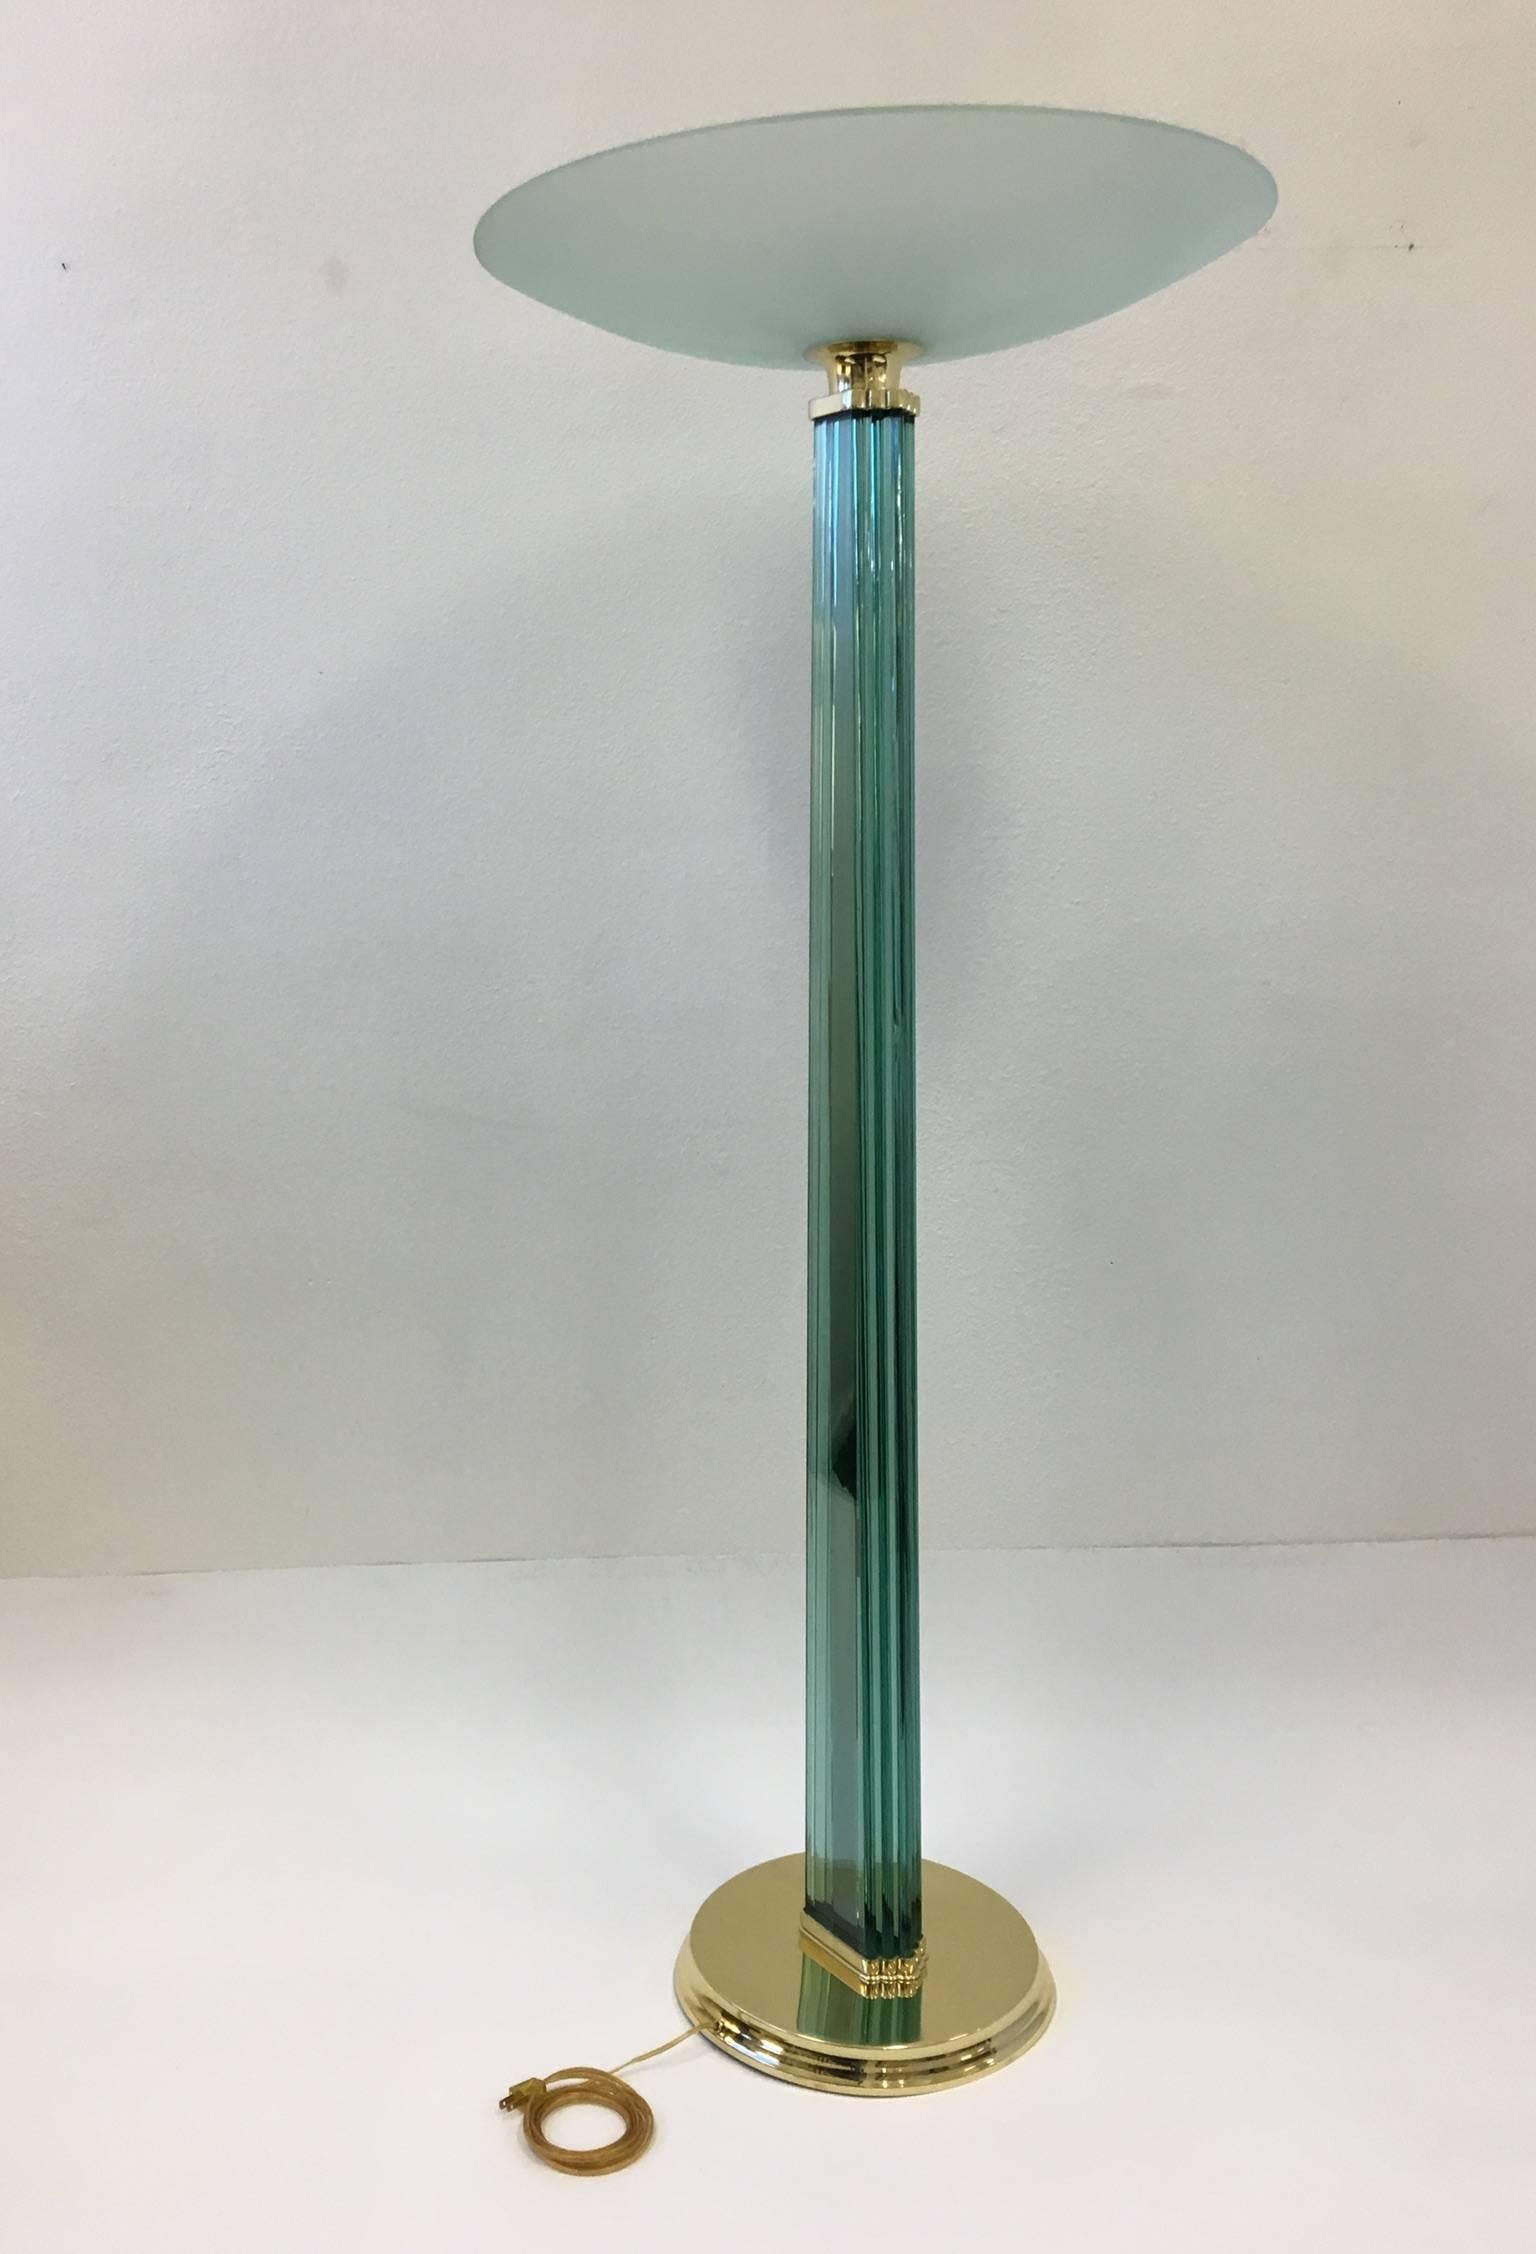 A spectacular Italian glass and polished brass Torchiere made in the 1950s in the style of Fontana Arte. The lamp has been newly rewired and re-plated. The lamp takes six candelabra lightbulb.
Dimensions: 68.5 inches high and 28 inches diameter.